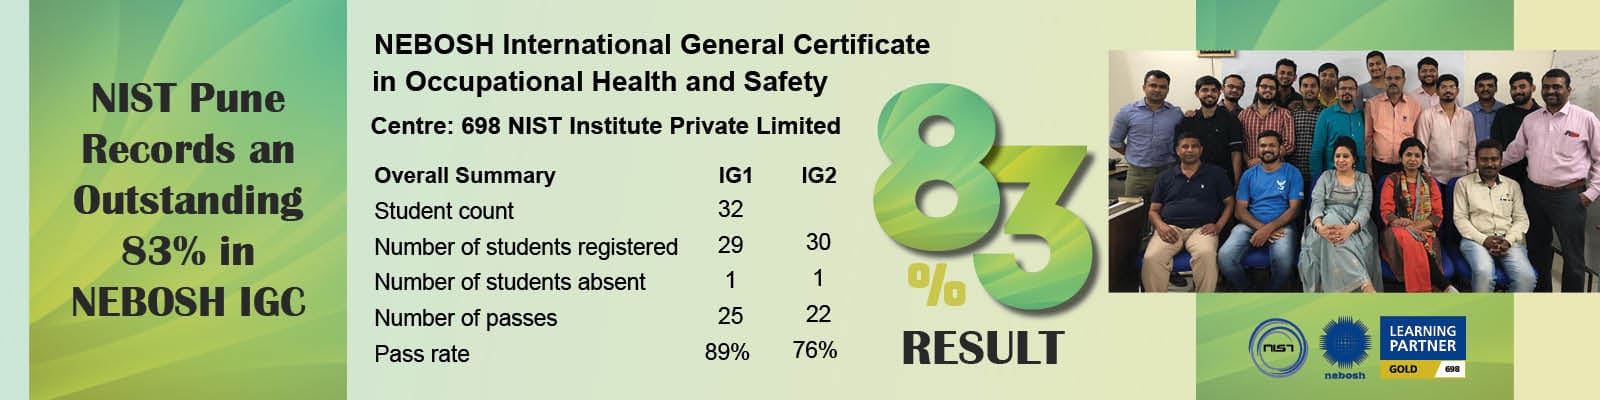 nist-pune-records-an-outstanding-83-in-nebosh-igc.php